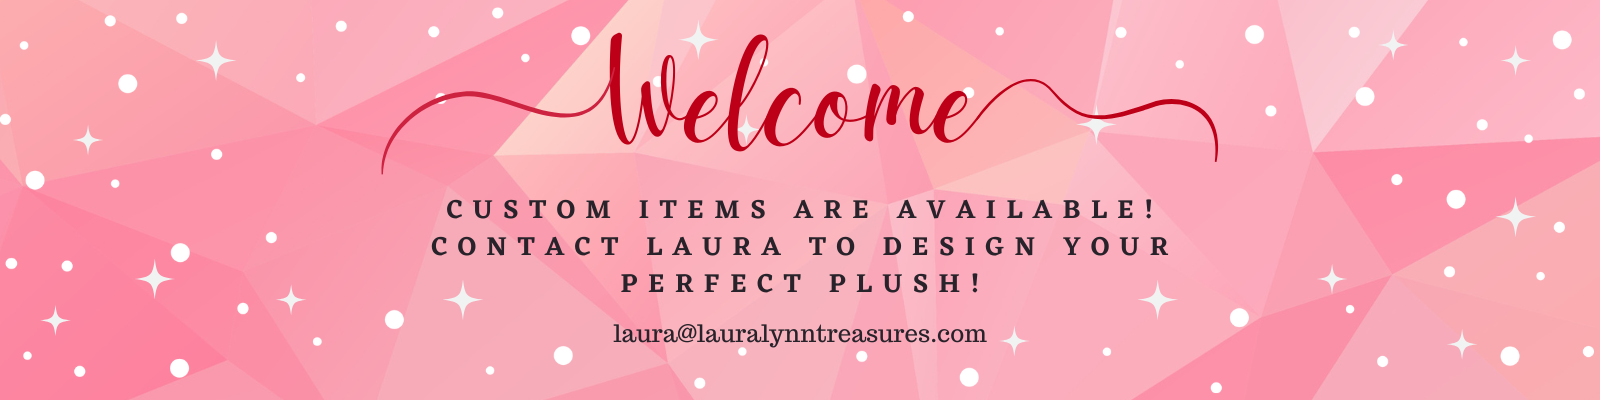 Custom Items are available!  Contact laura@lauralynntreasures.com to design your perfect plush!